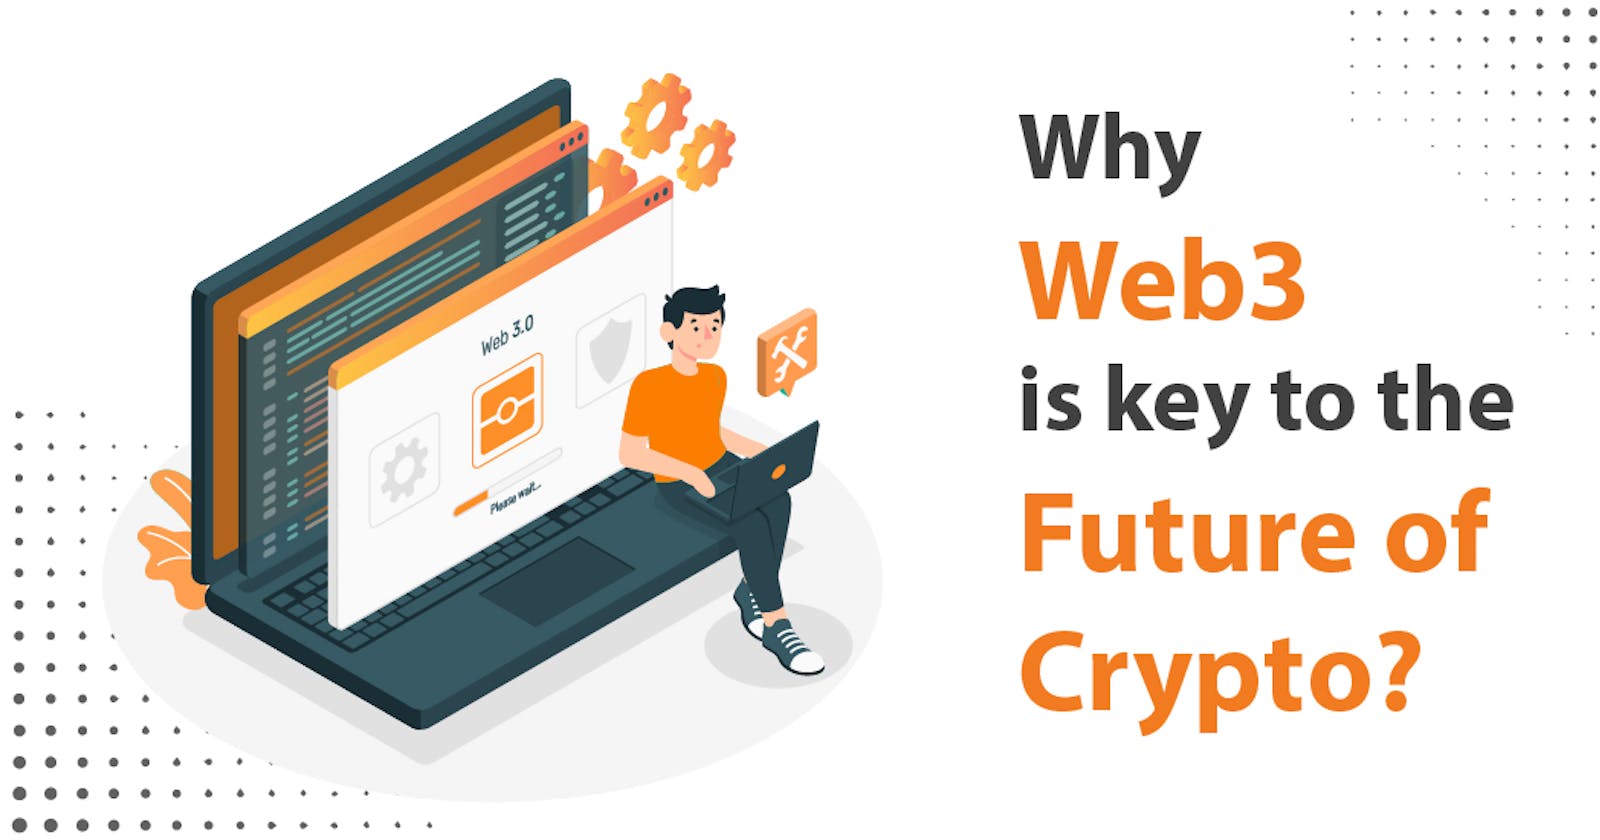 Why Web3 is Key to the Future?